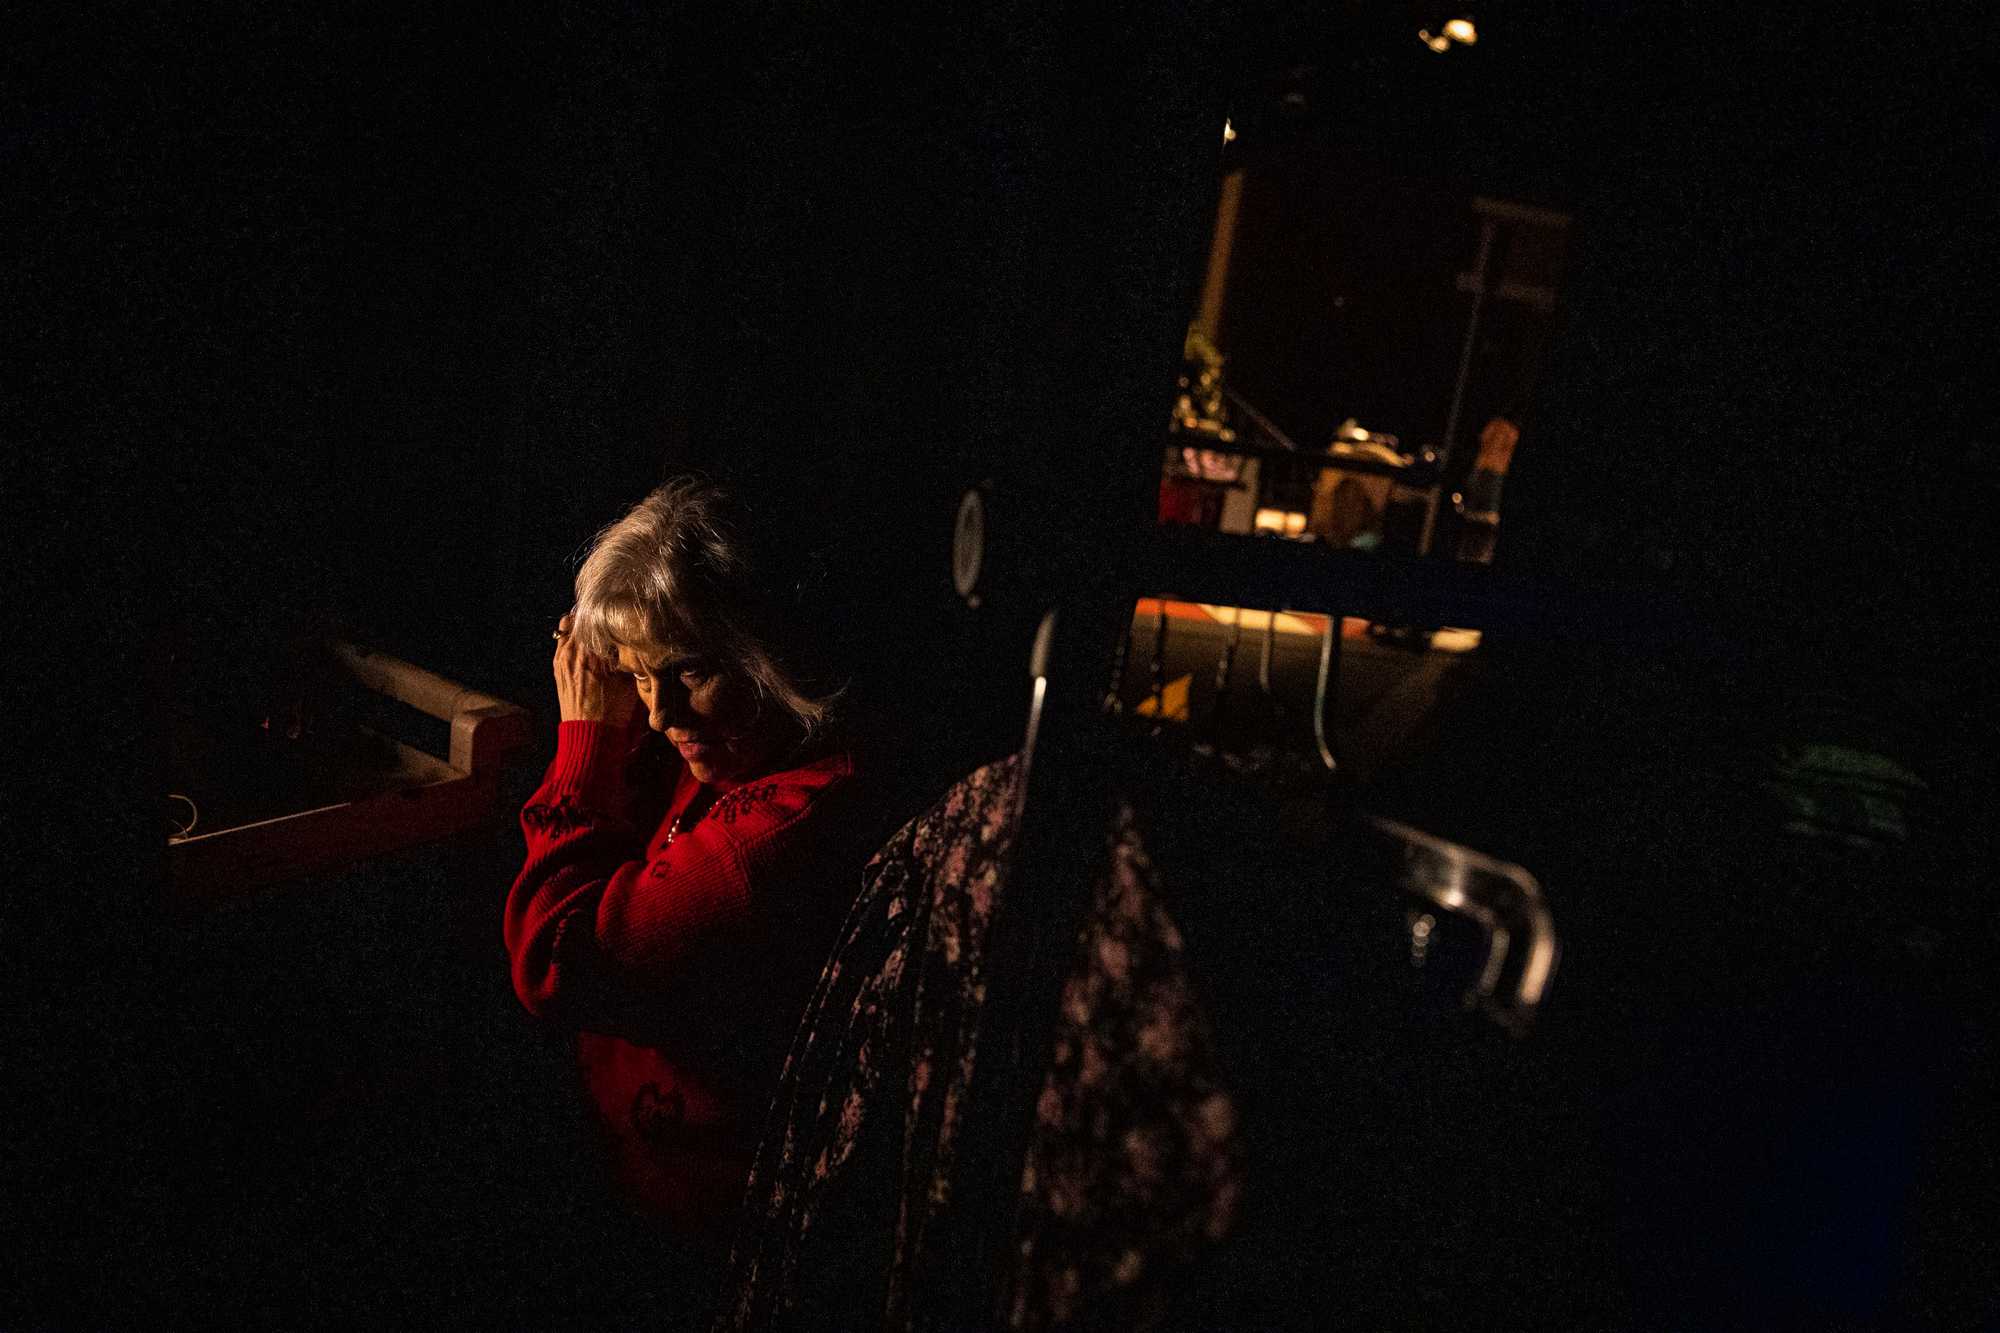 Gayla Rodenbur curled her hair in the backstage shadows while getting ready for her scene during a dress rehearsal .